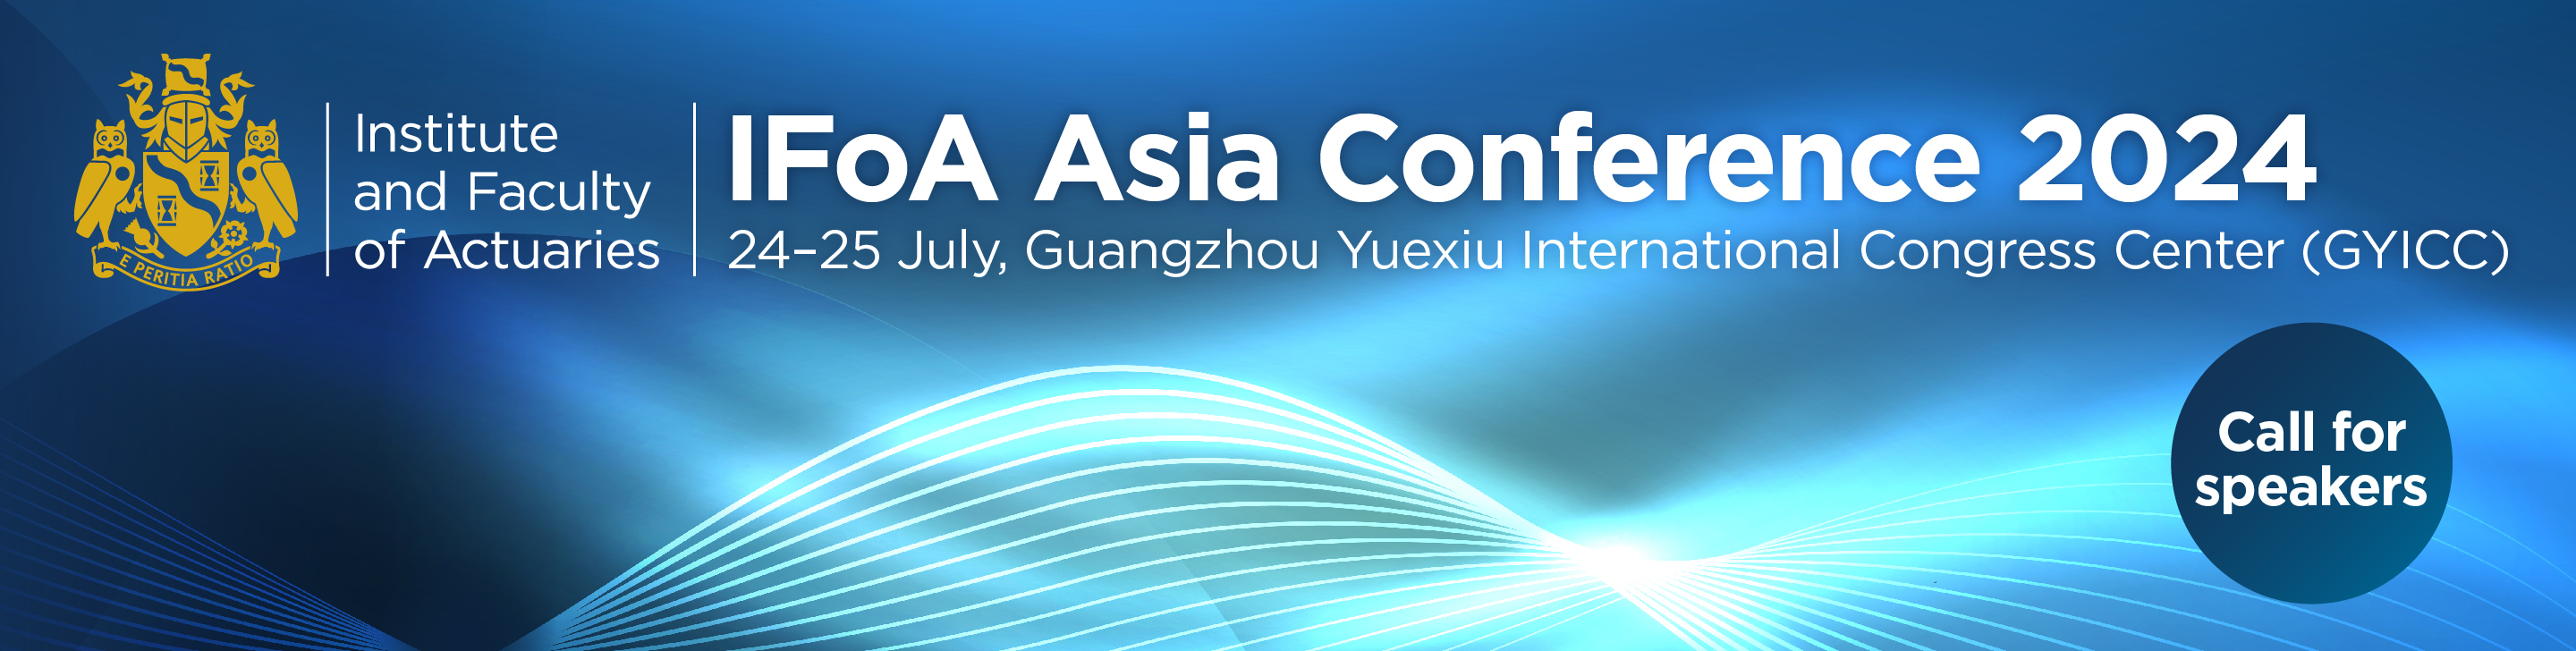 IFoA Asia Conference 2024, 24 to 25 July, Guangzhou Yuexiu International Congress Centre (GYICC), call for speakers